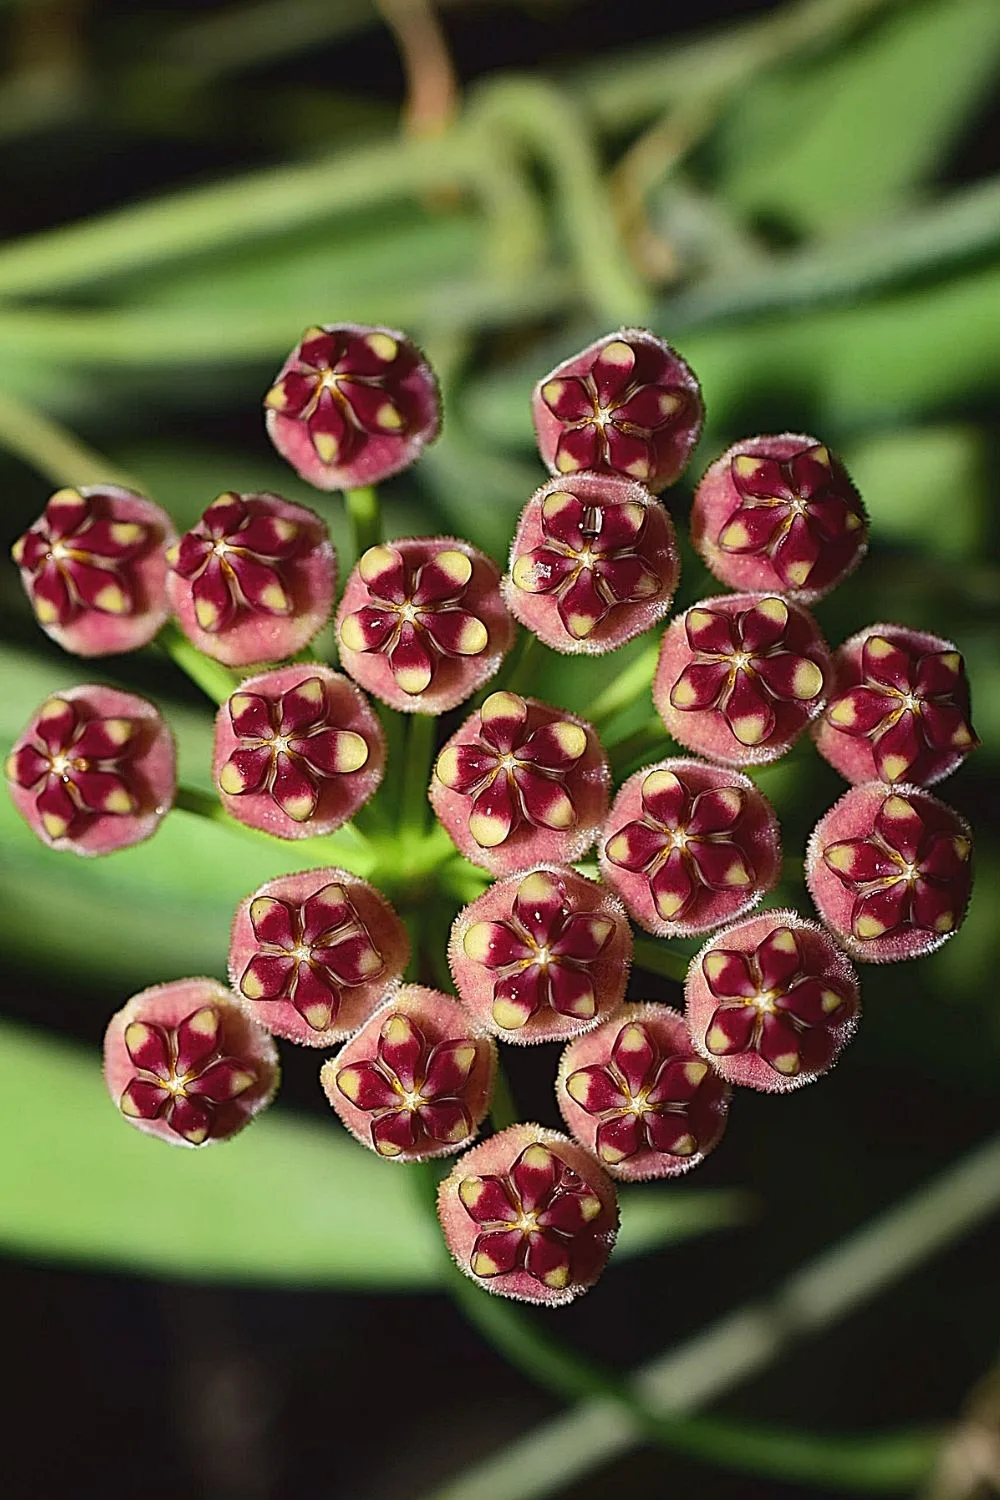 Hoya Wayetii is a plant coming from the Philippines that's great to place indoors, preferably by a northwest-facing window